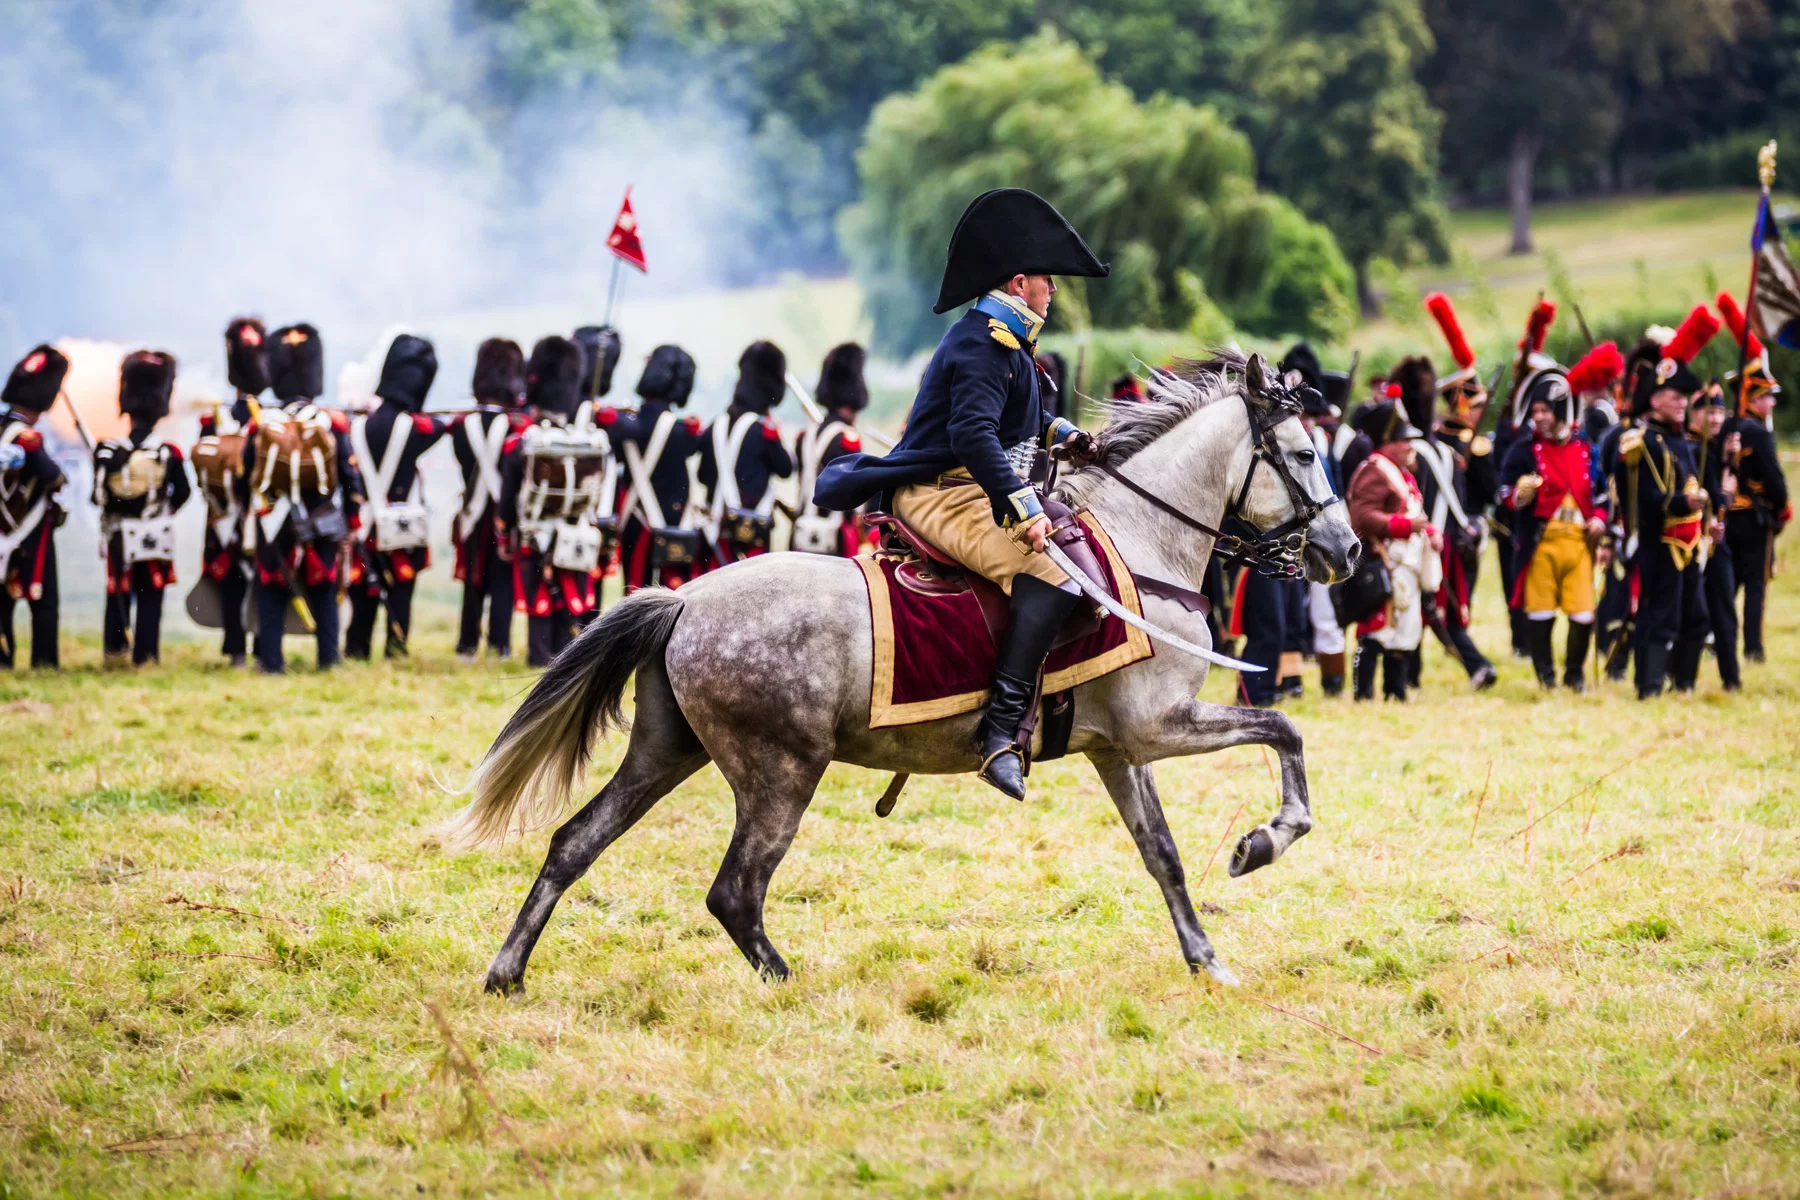 A man on horseback at a reenactment of the Battle of Waterloo